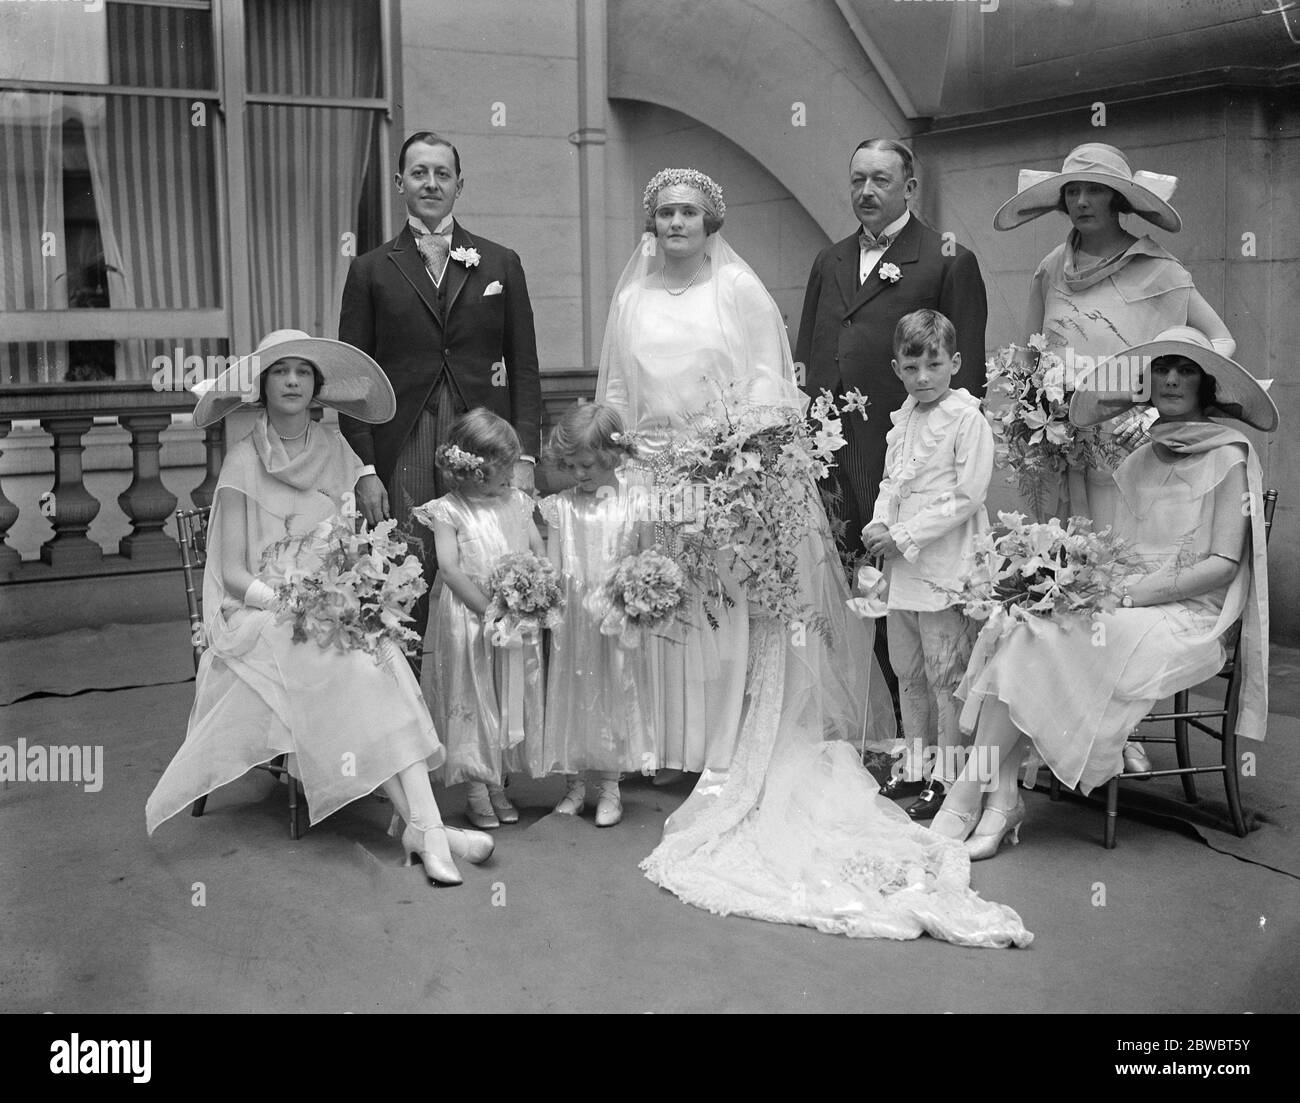 Lady Latta 's daughter weds . Miss Mary Latta and Count de Crameyel were married at St James 's , Spanish Place . Bride and bridegroom with the bridesmaids , page and best man . 22 July 1924 Stock Photo